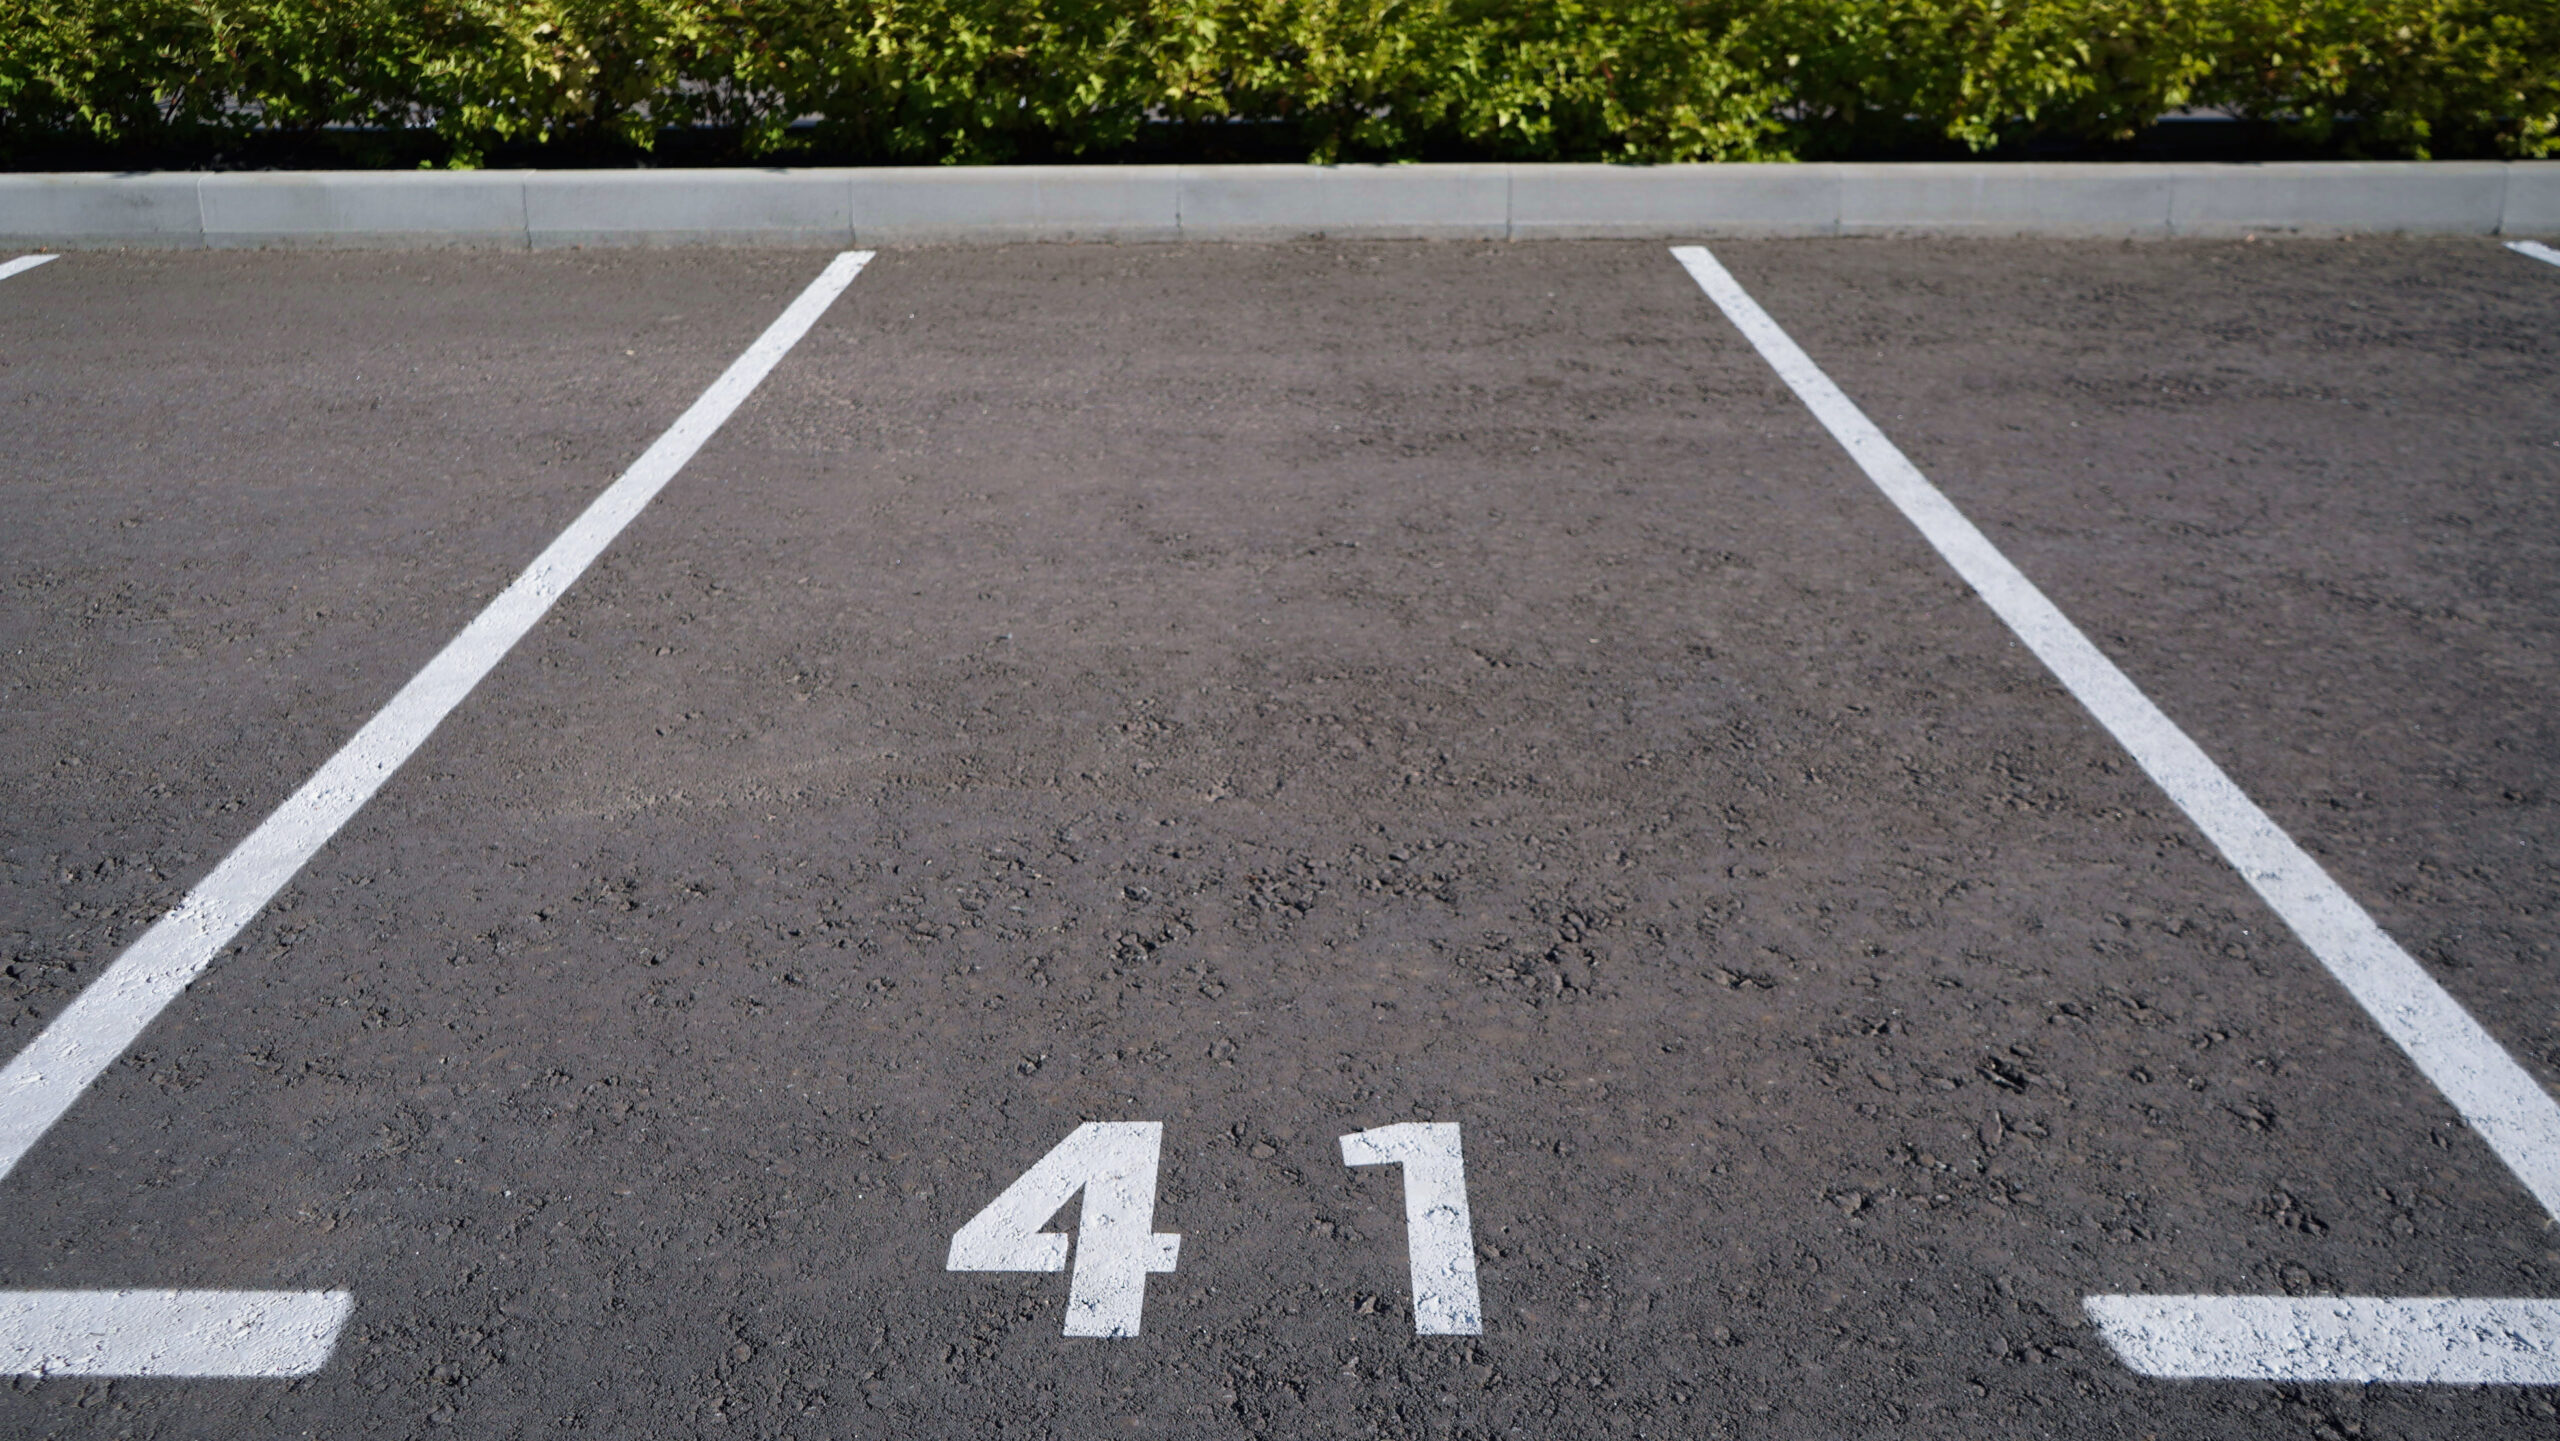 Do Tenants Without Vehicles Still Need Assigned Parking Spots?